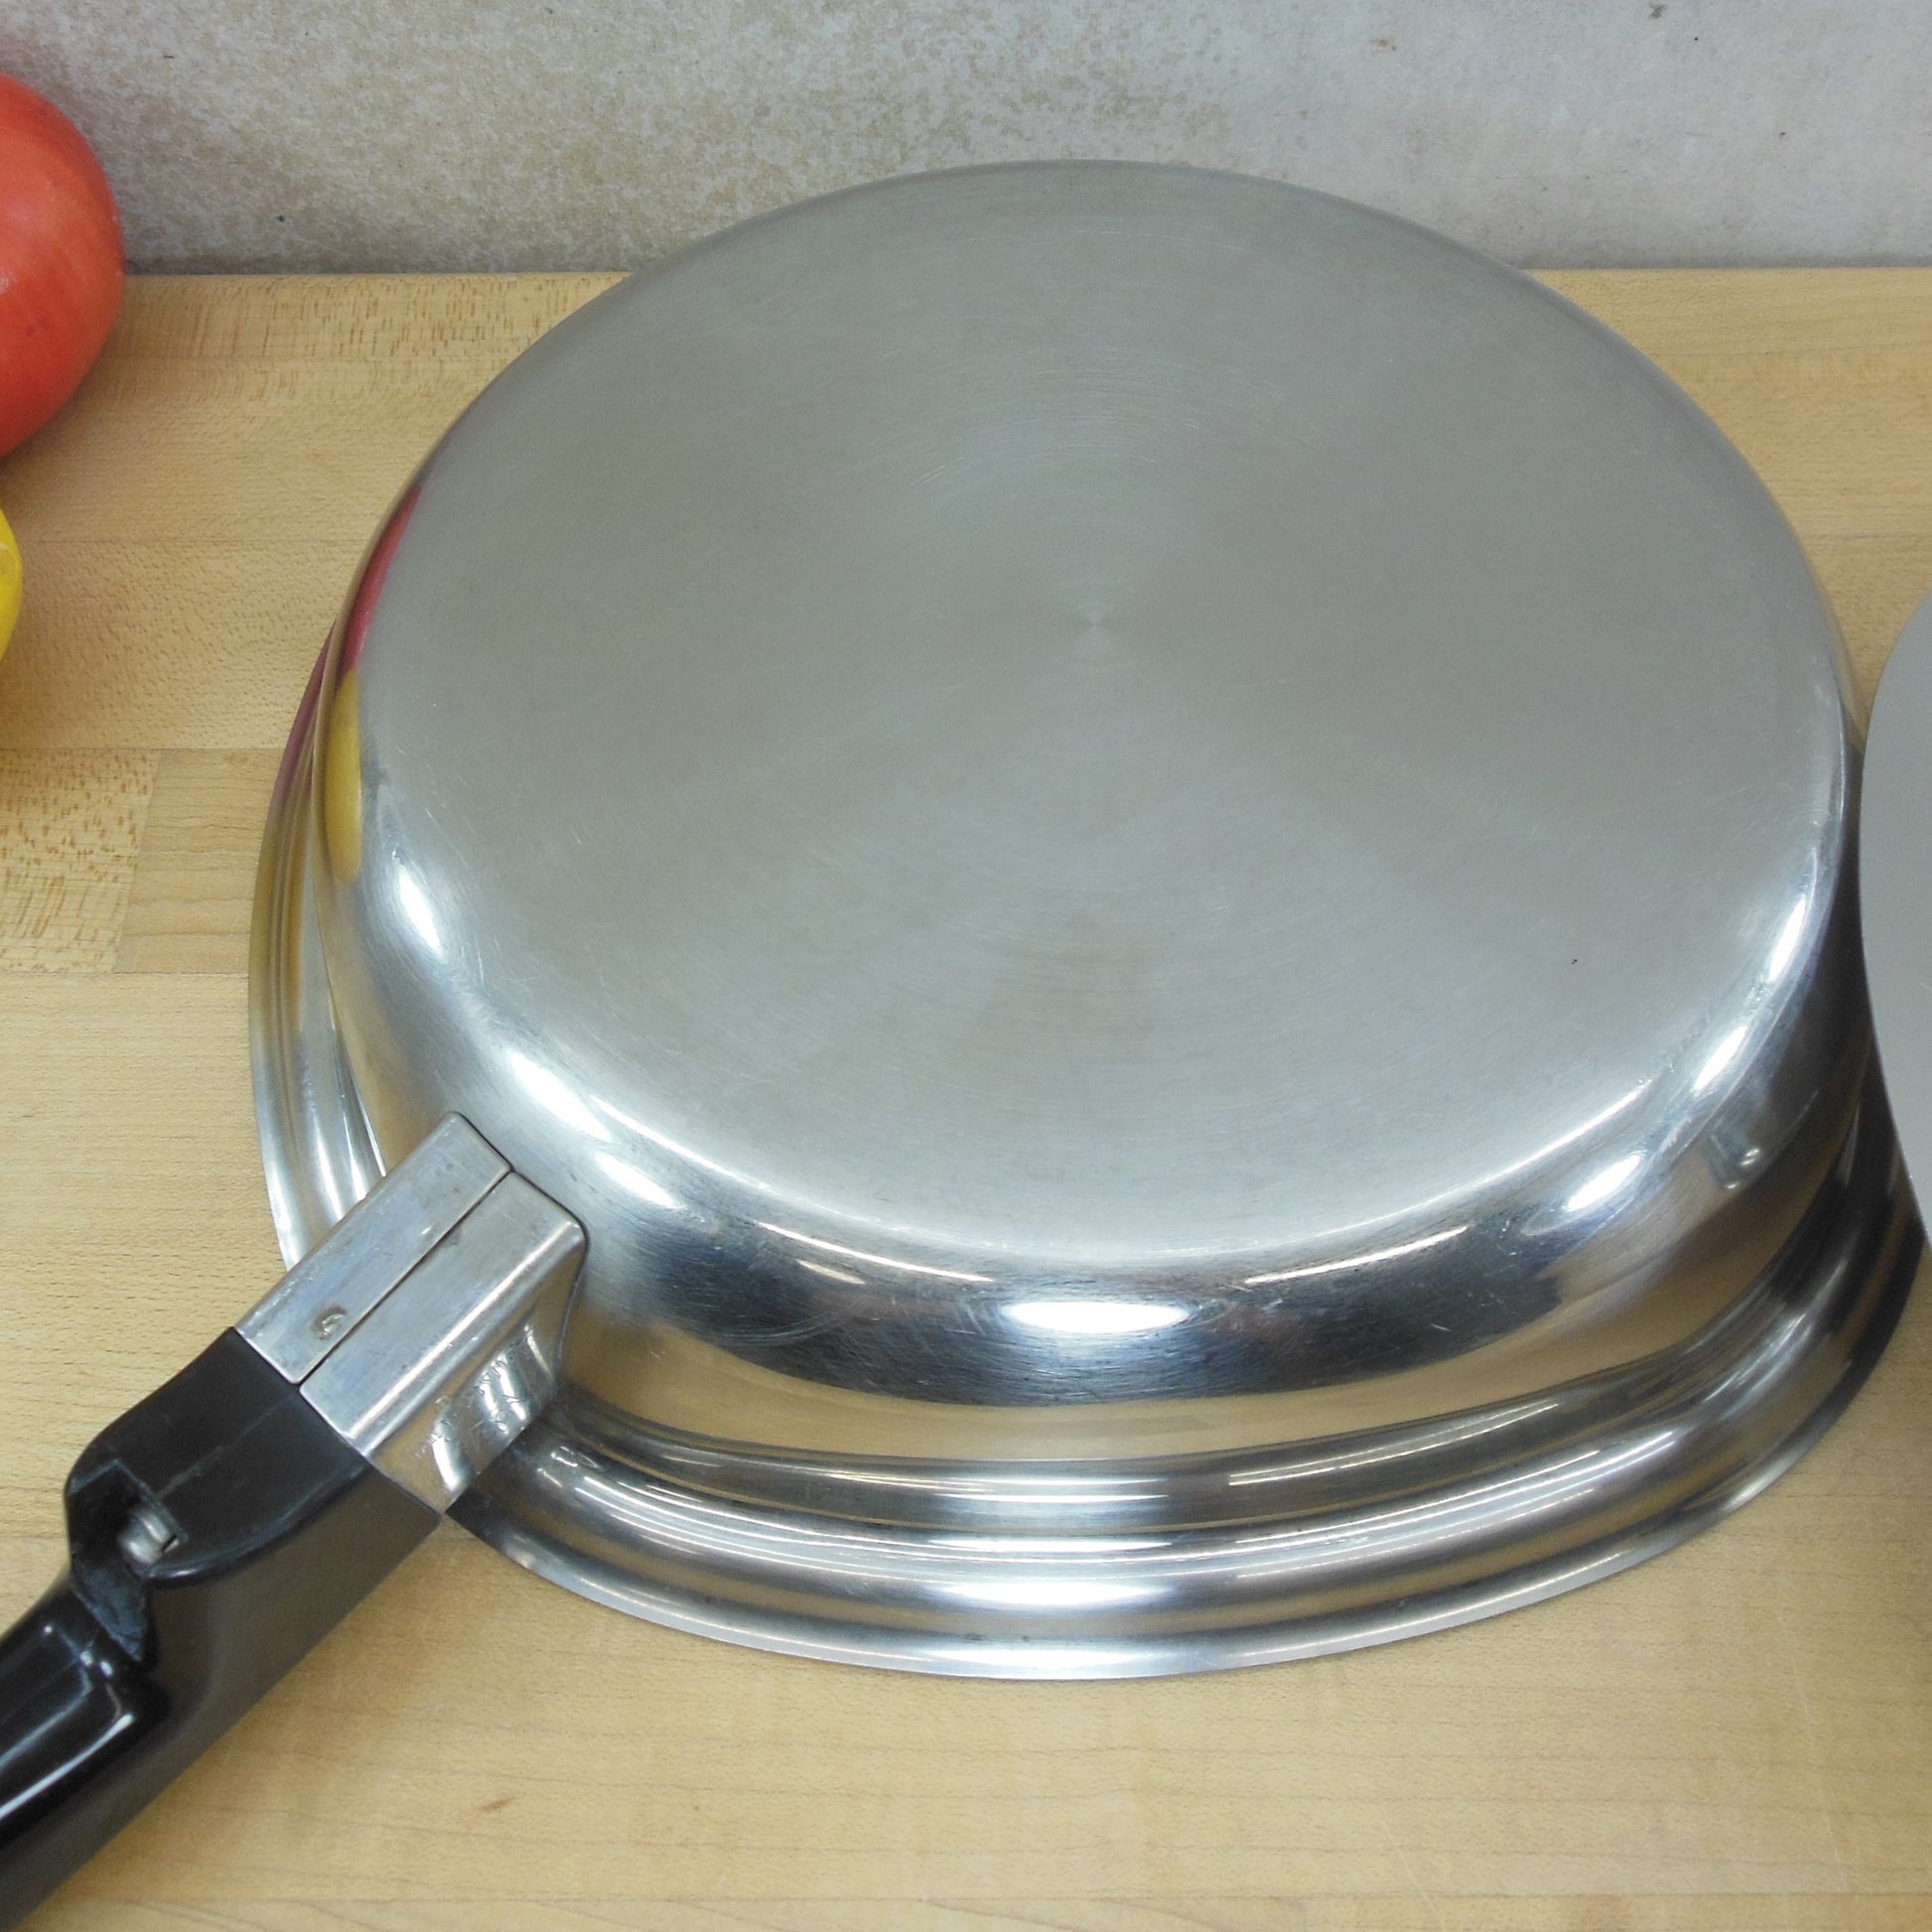 Aristo-Craft West Bend 9.75" Stainless Fry Pan Skillet & Lid square